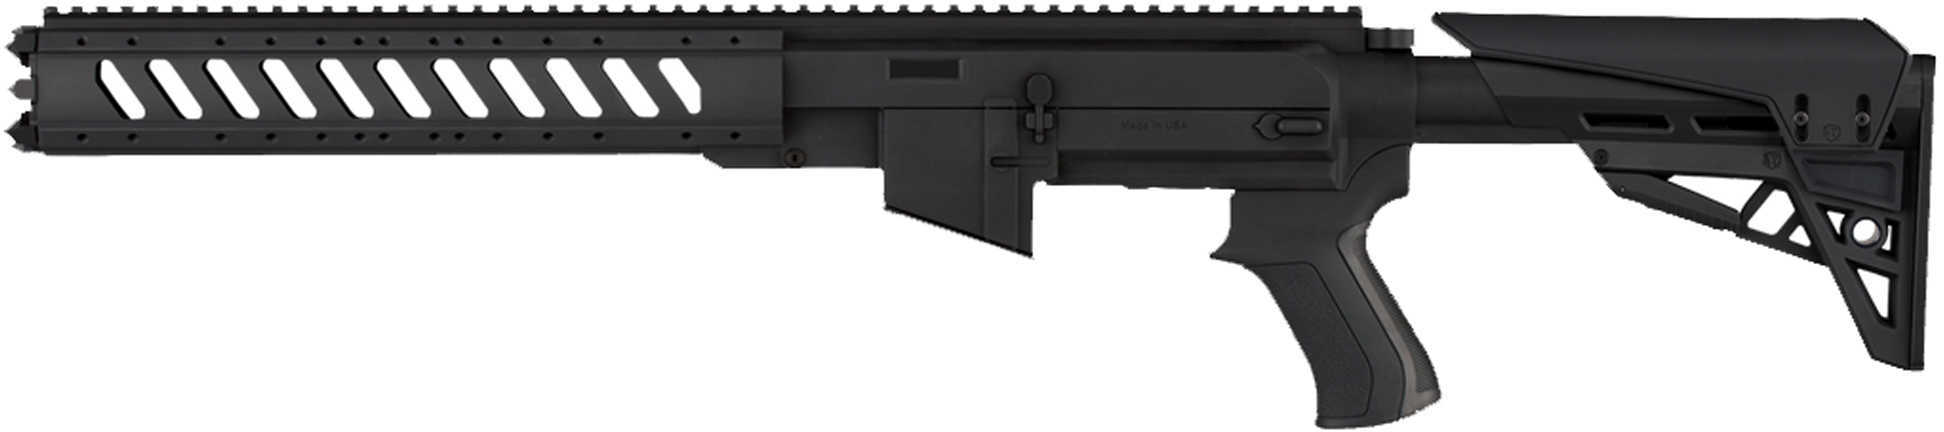 ATI Ruger® AR22 Tactlite Conv Kit 6 Sided Rail Md: